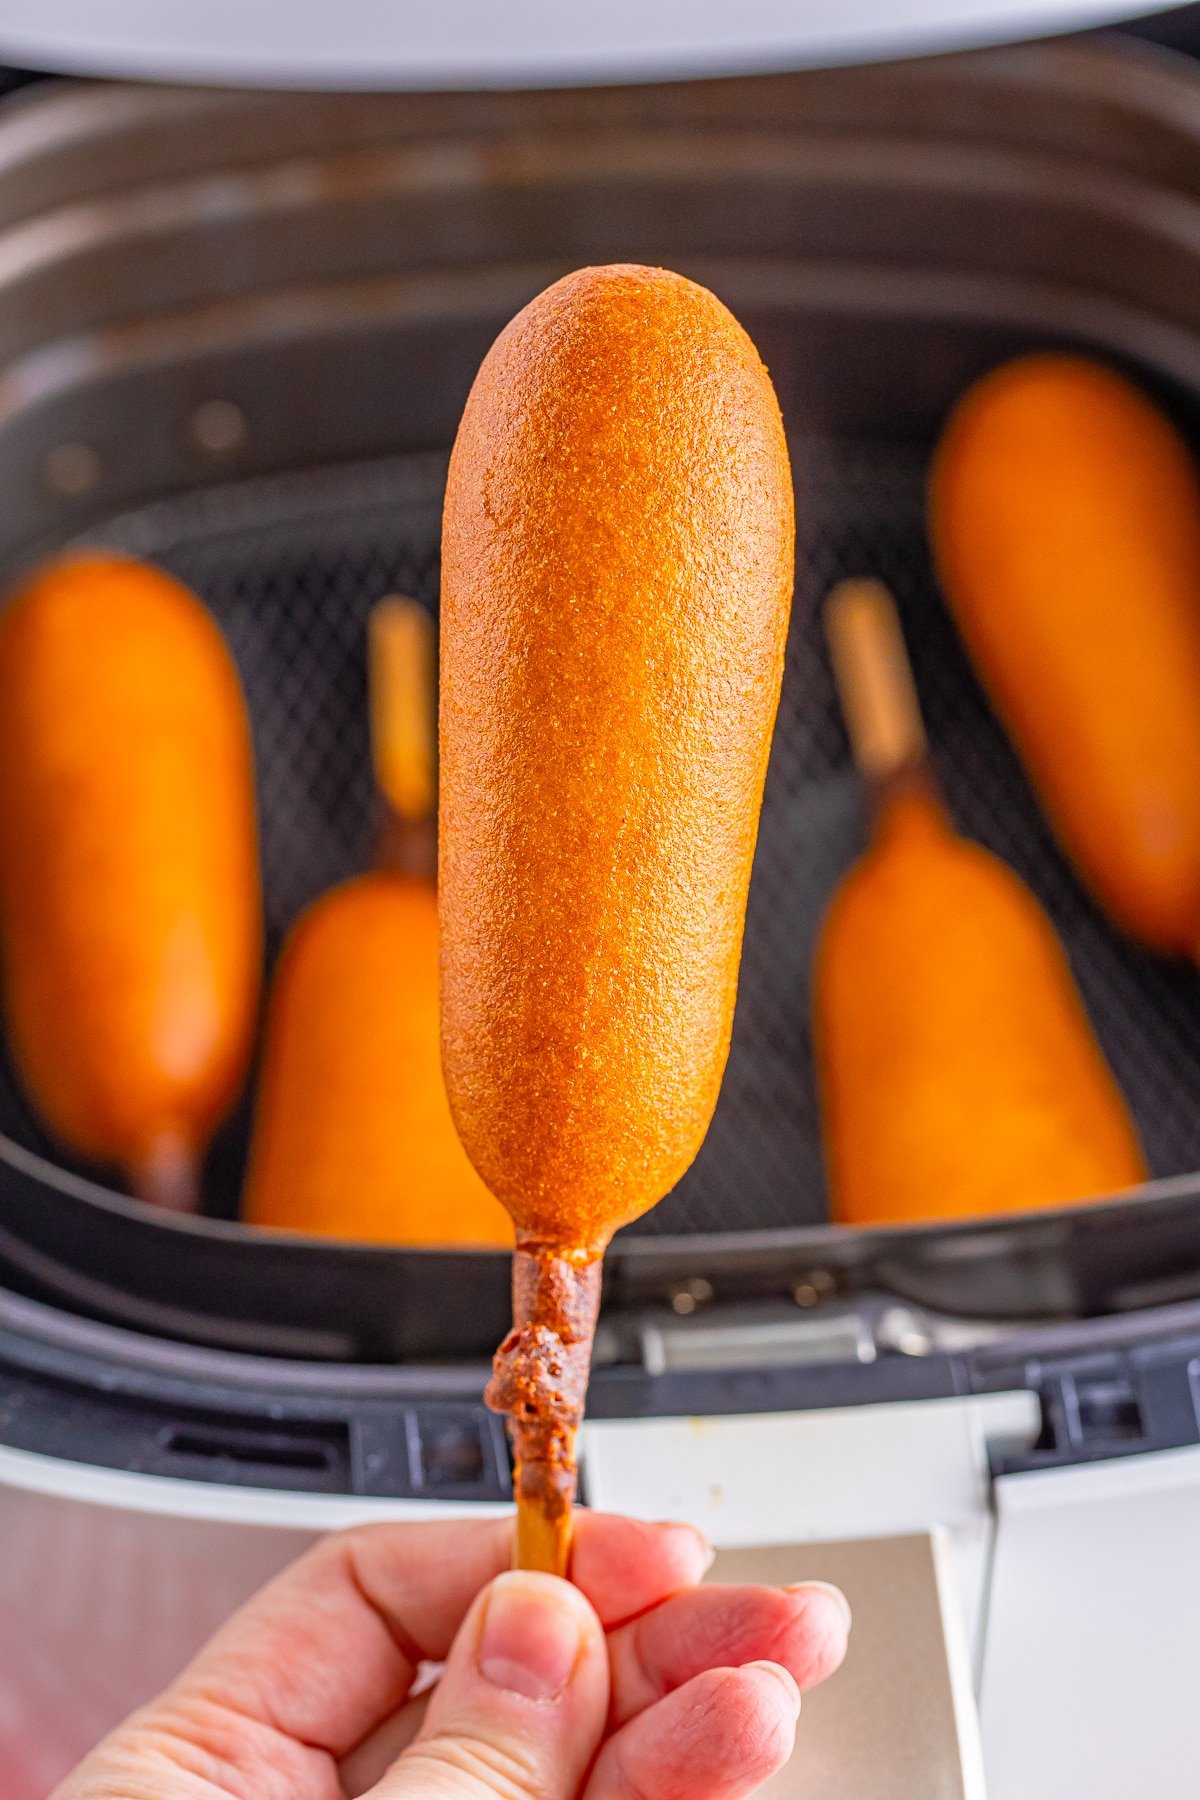 a hand holding up a cooked air fryer frozen corn dog